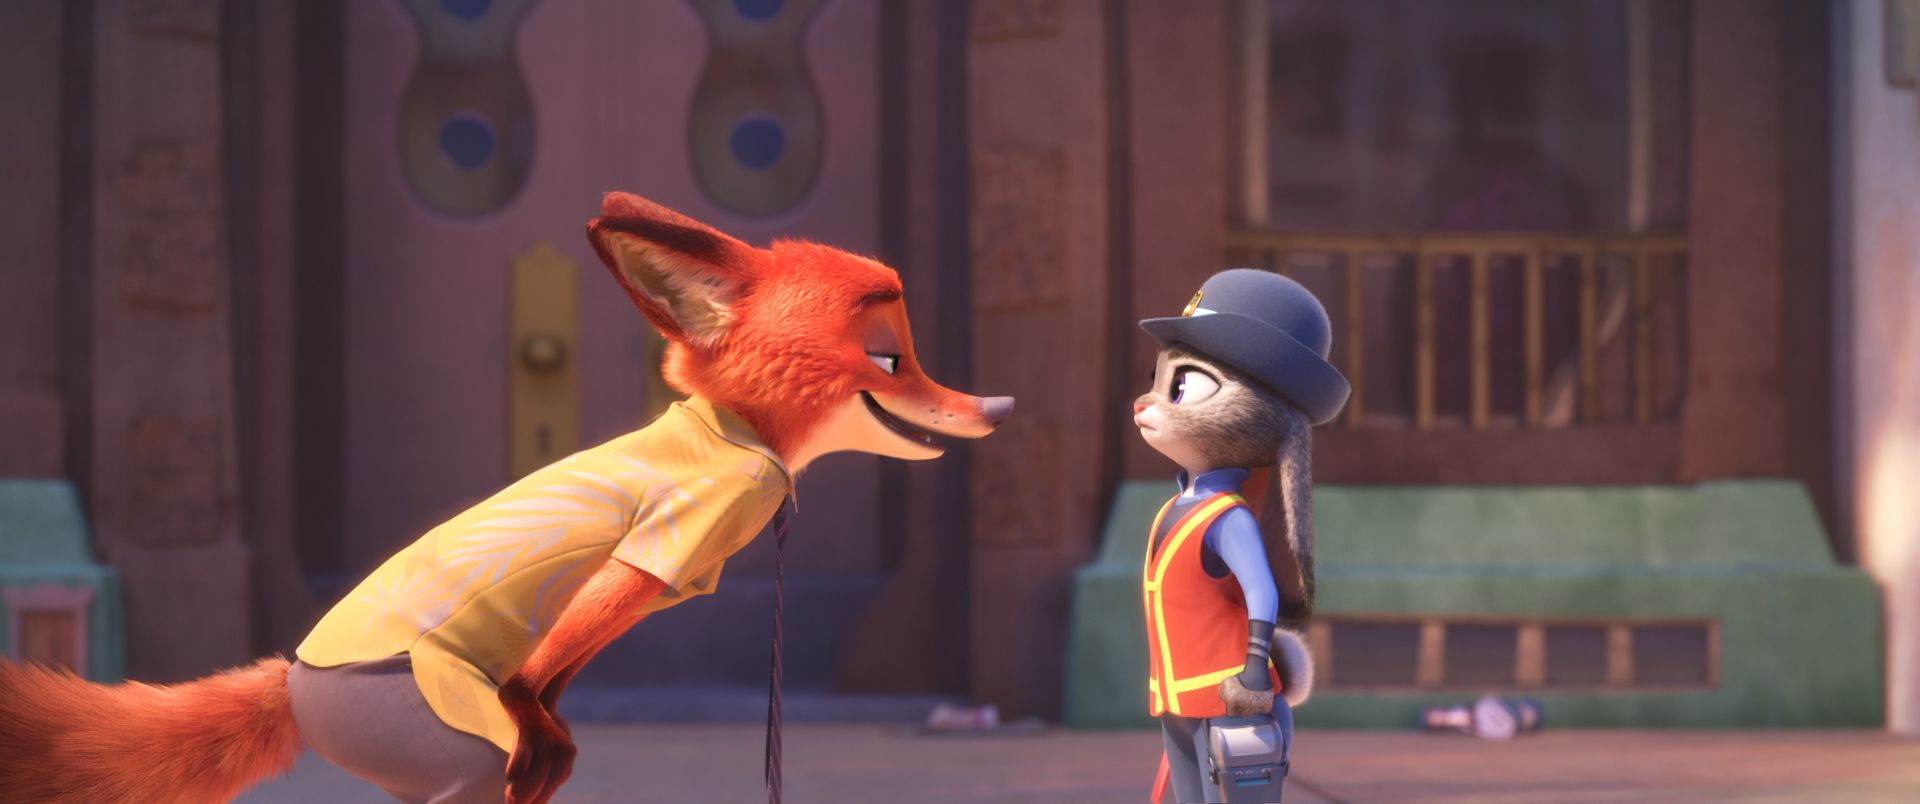 Disney is marketing 'Zootopia' to furries because it would be crazy not to  - The Daily Dot